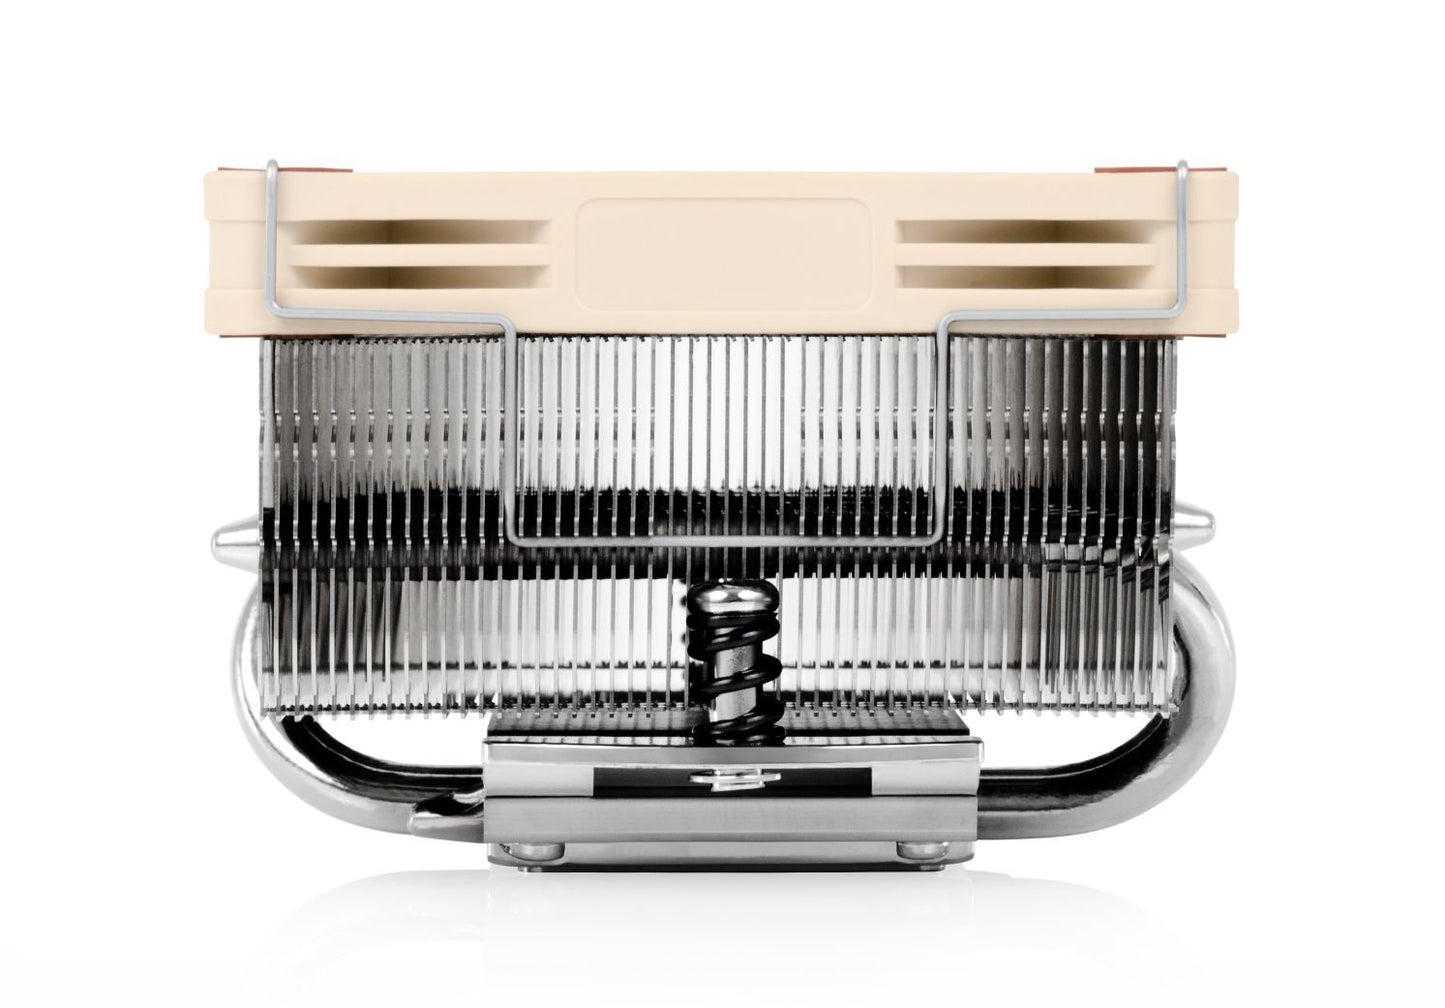 Noctua NH-L9x65 highly compact, quiet low-profile cooler